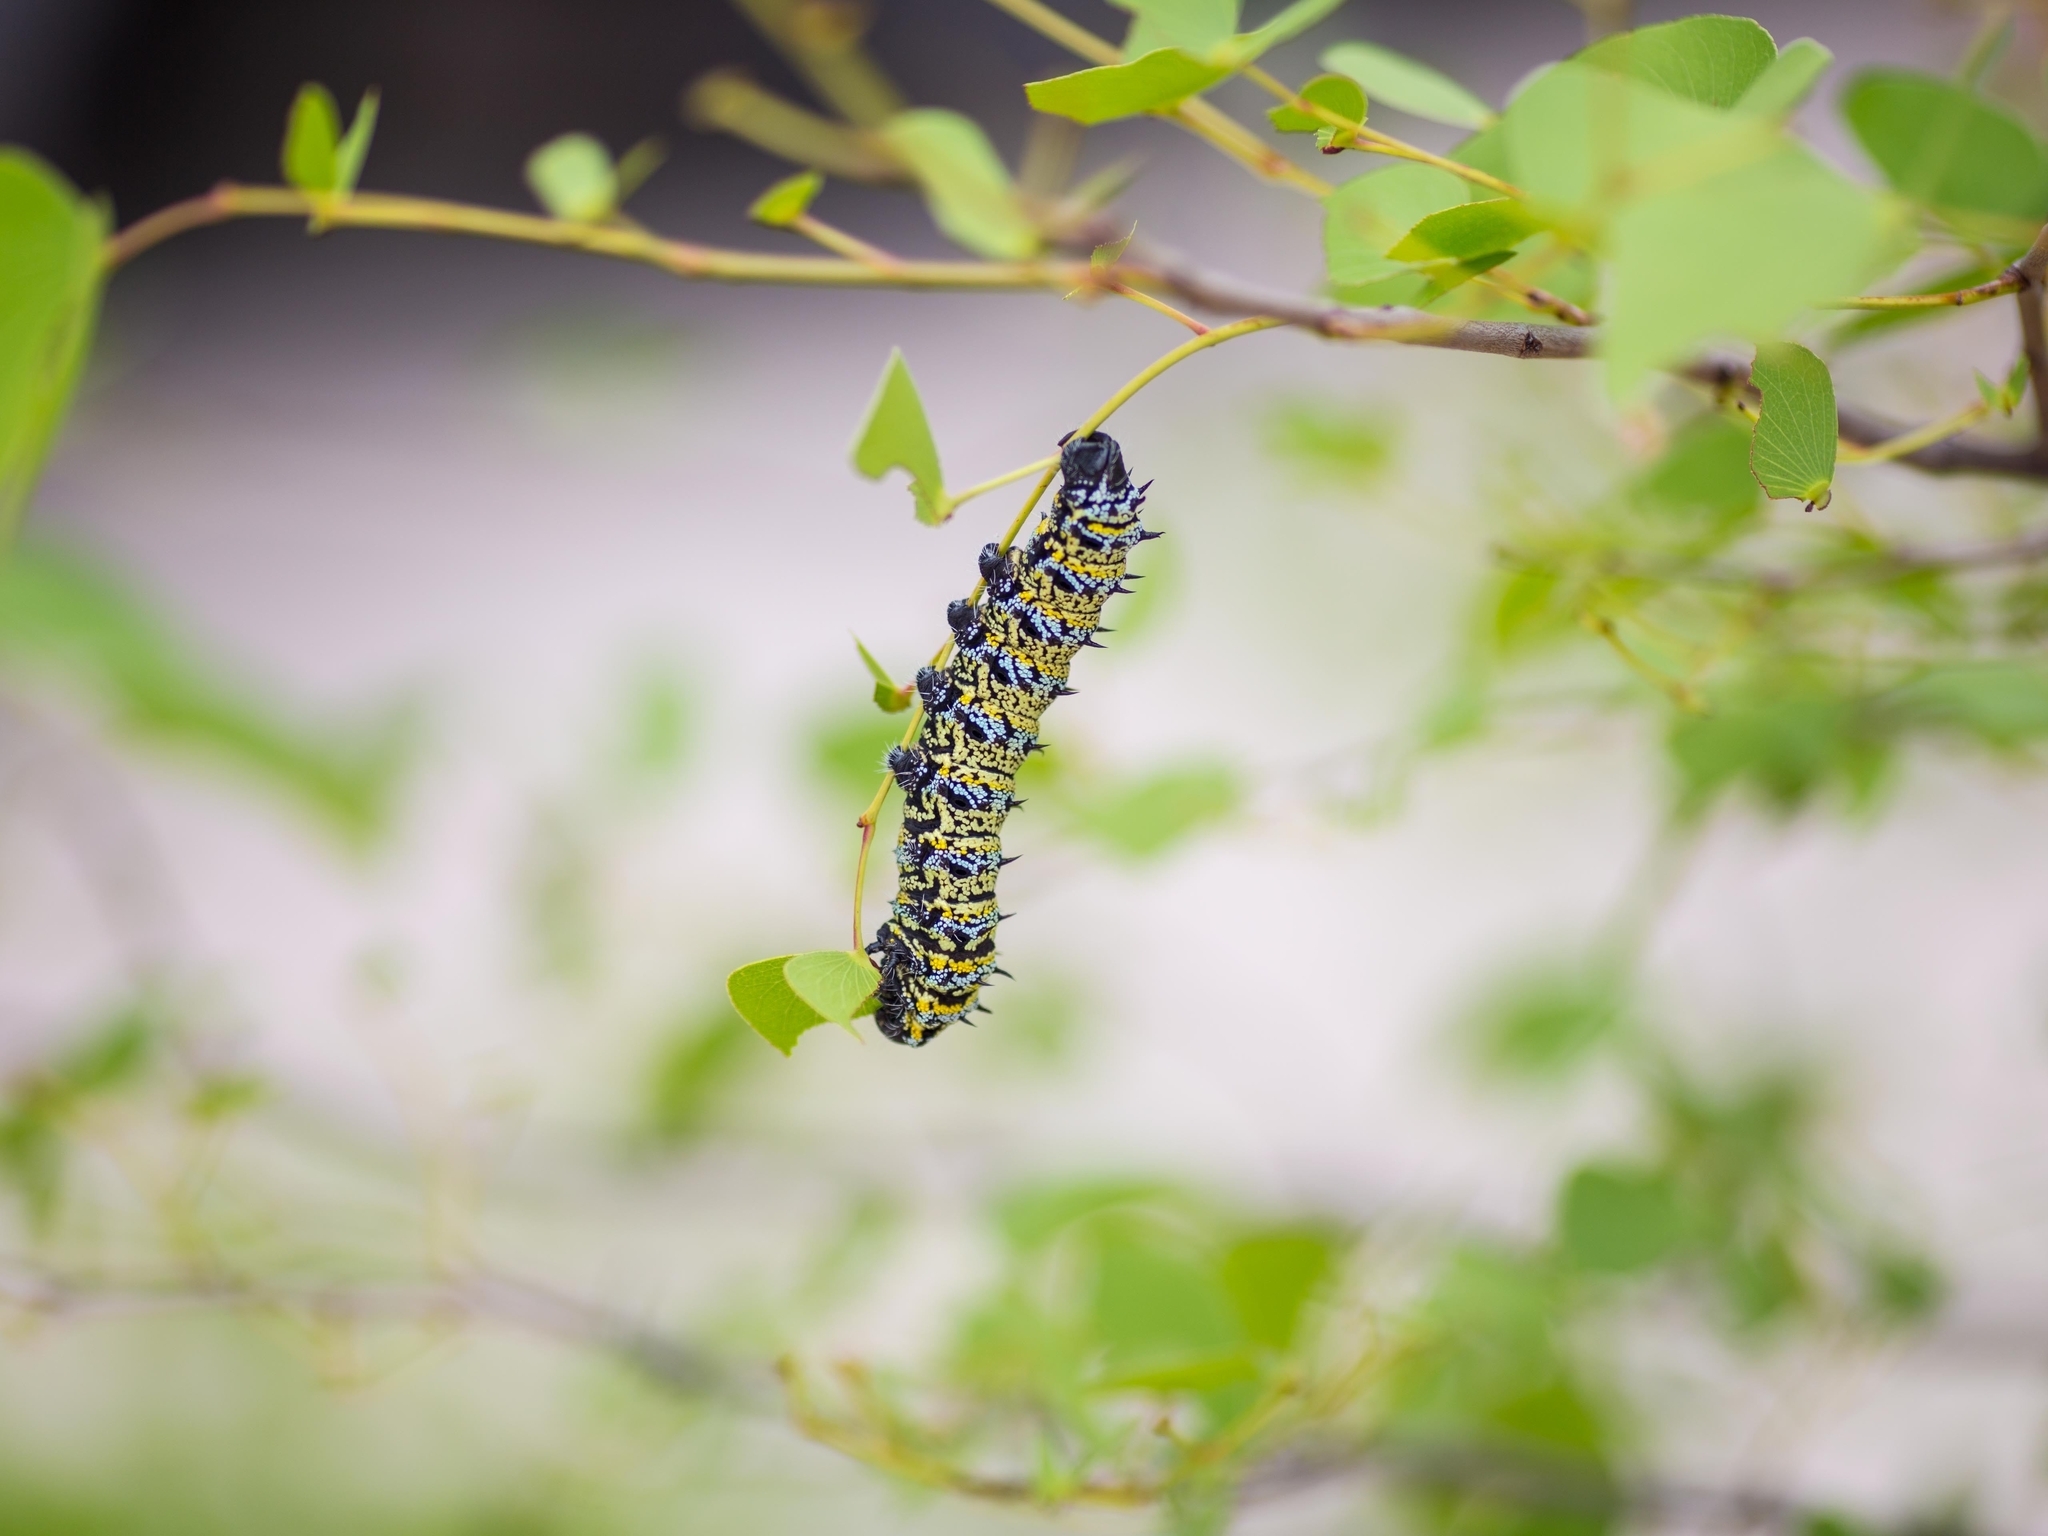 Image: Caterpillar, on a twig, leaves, blurred background